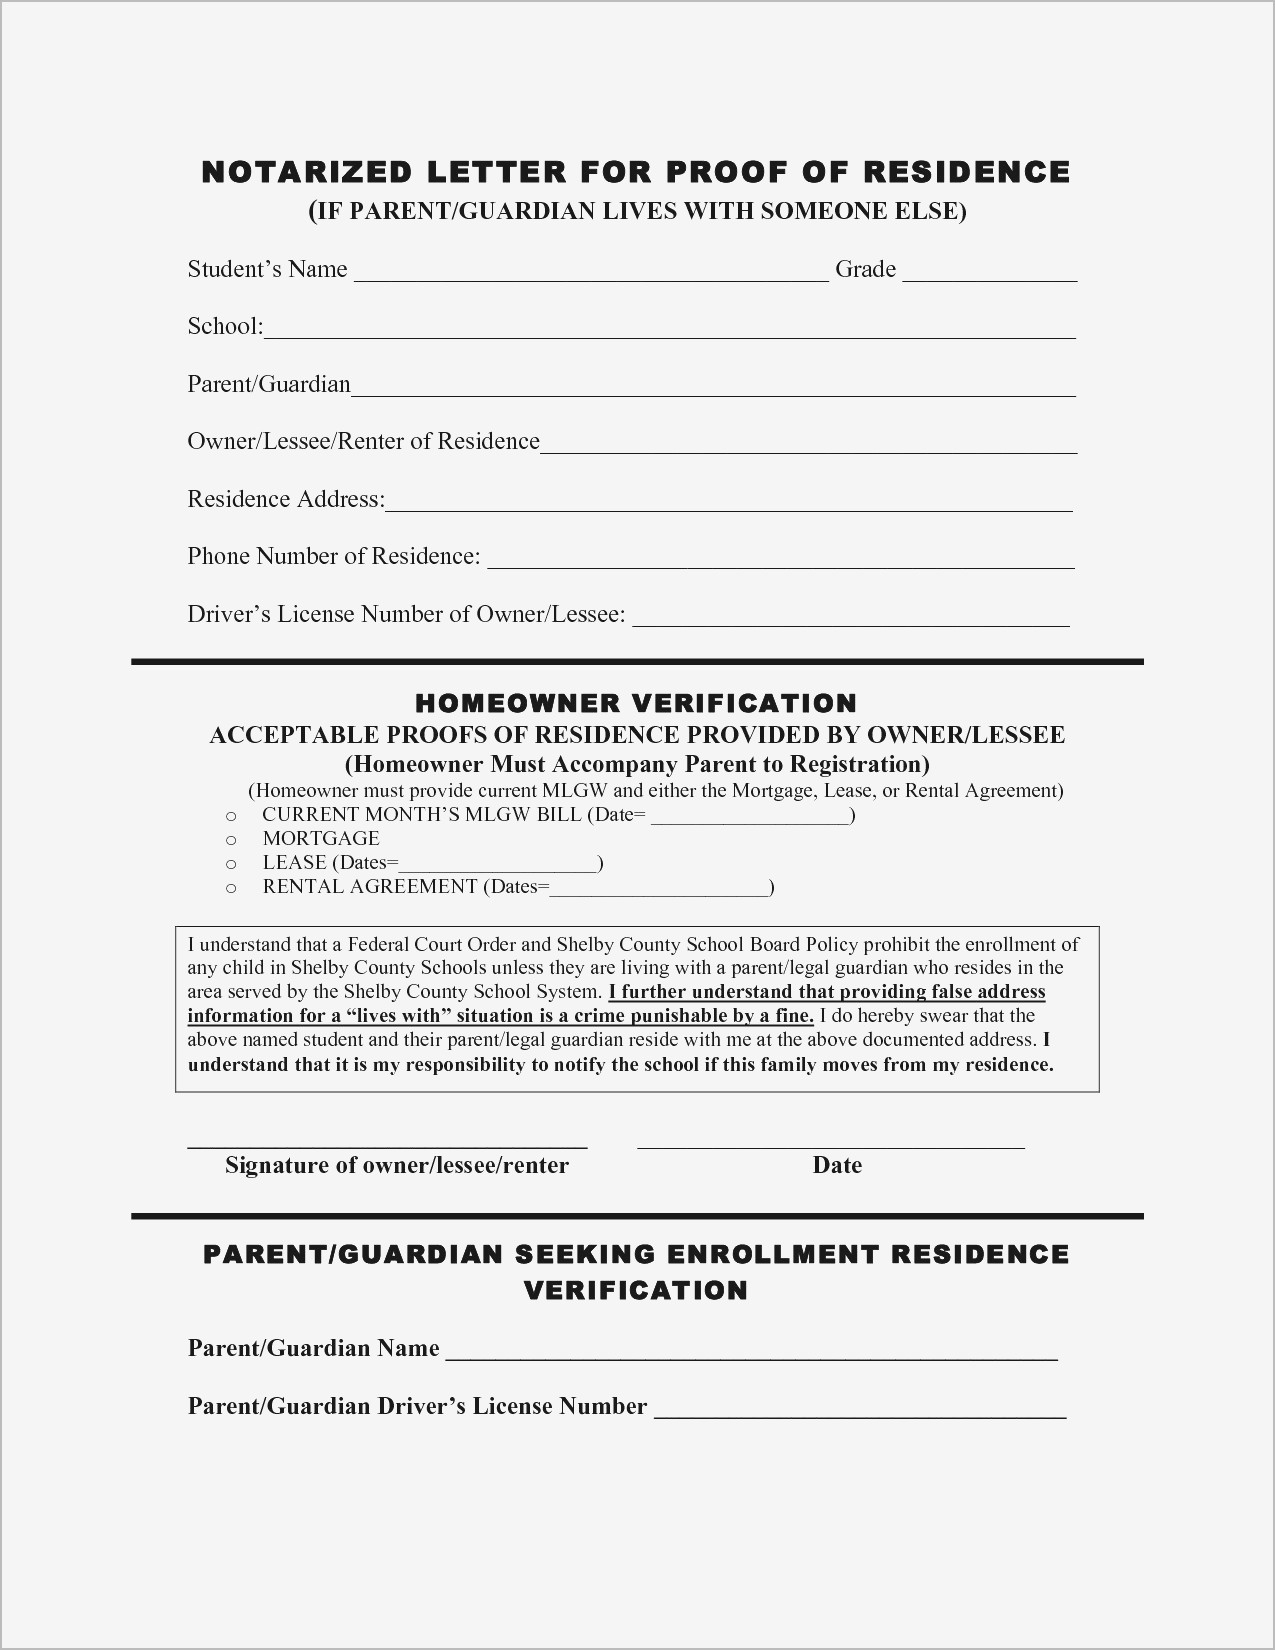 notarized letter template for residency example-Proof Residency Letter Template Word Awesome Printable Notarized Letter Residency Template Samples 2-f